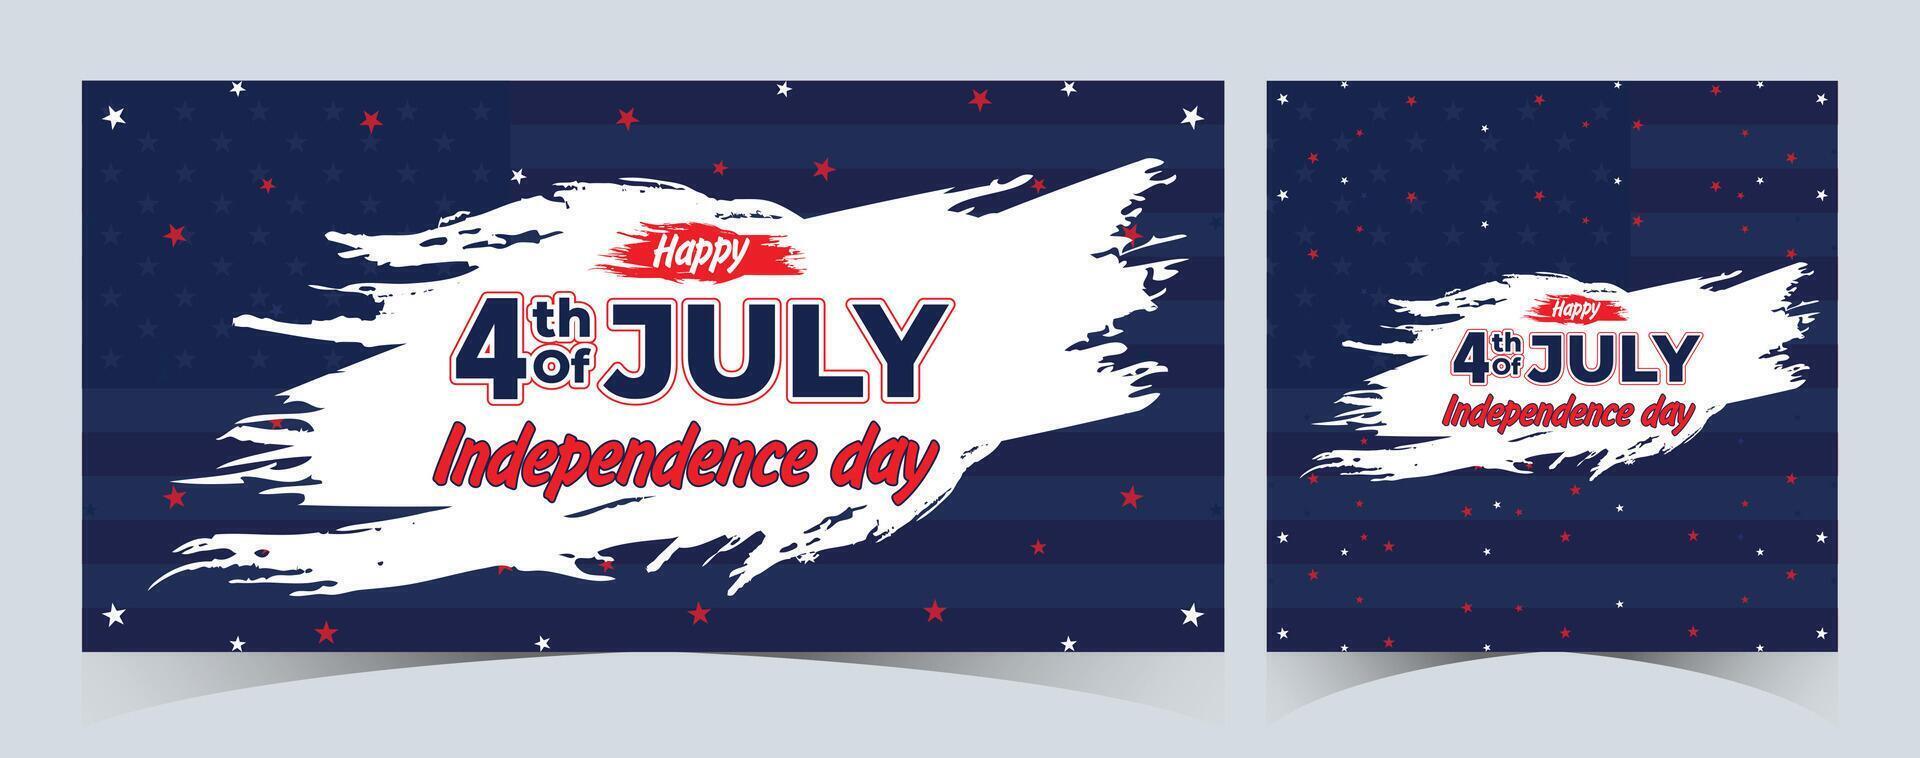 Set of Happy 4th of July. Fourth July Independence Day USA. Independence Day sale web banner. Independence Day USA social media promotion template. greeting card, poster with United States flag vector